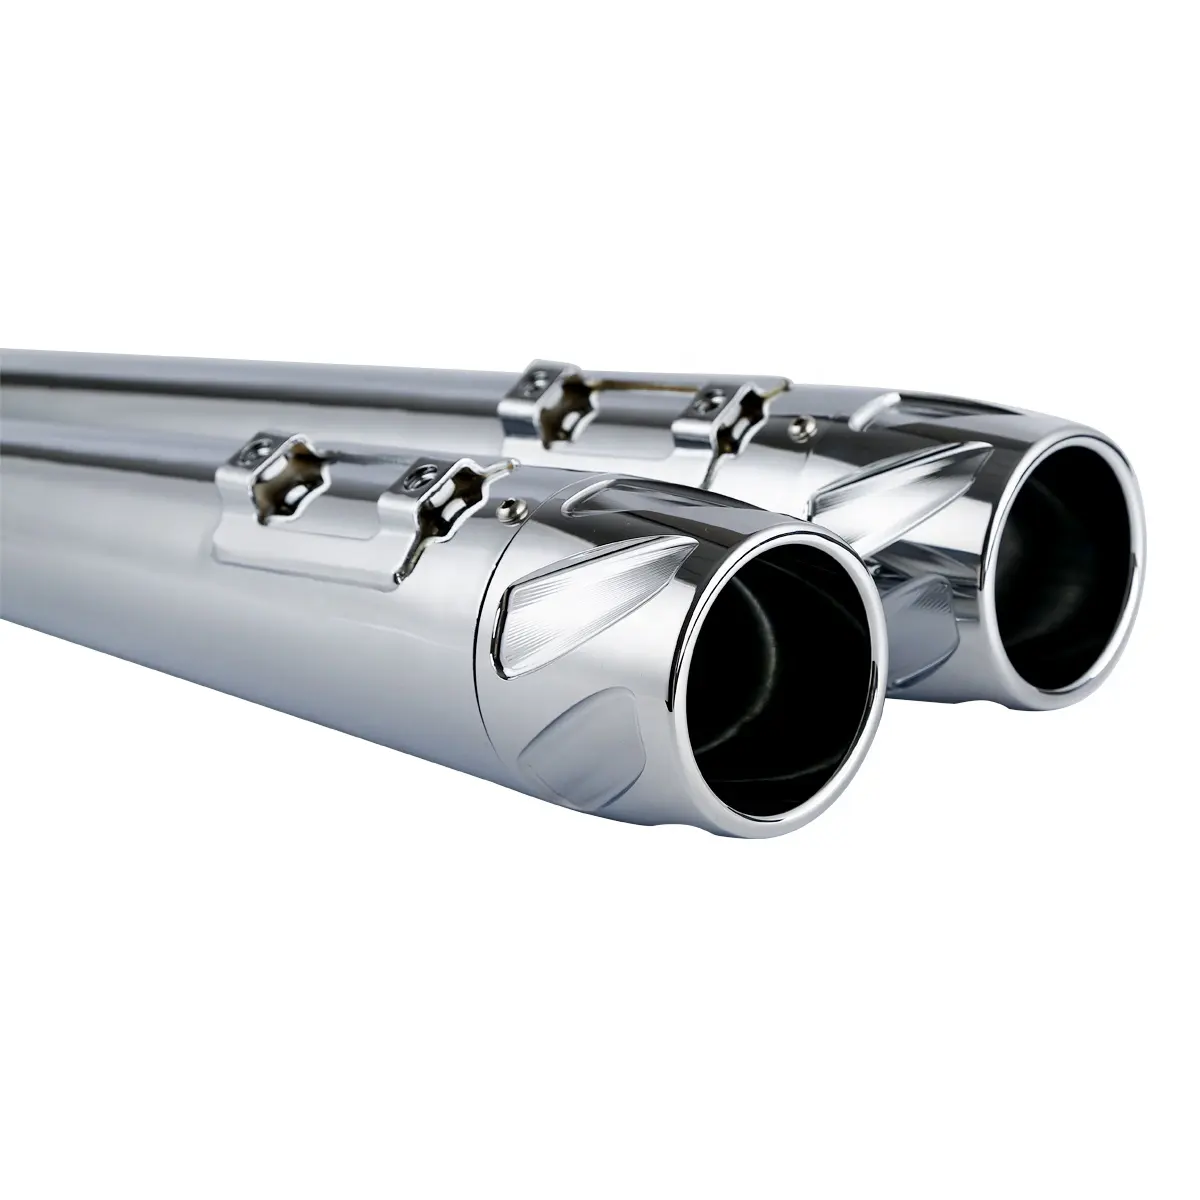 XF2906315-05-E 4" Megaphone Muffler Exhaust Pipes Fit For Harley Touring Electra Ultra Glide